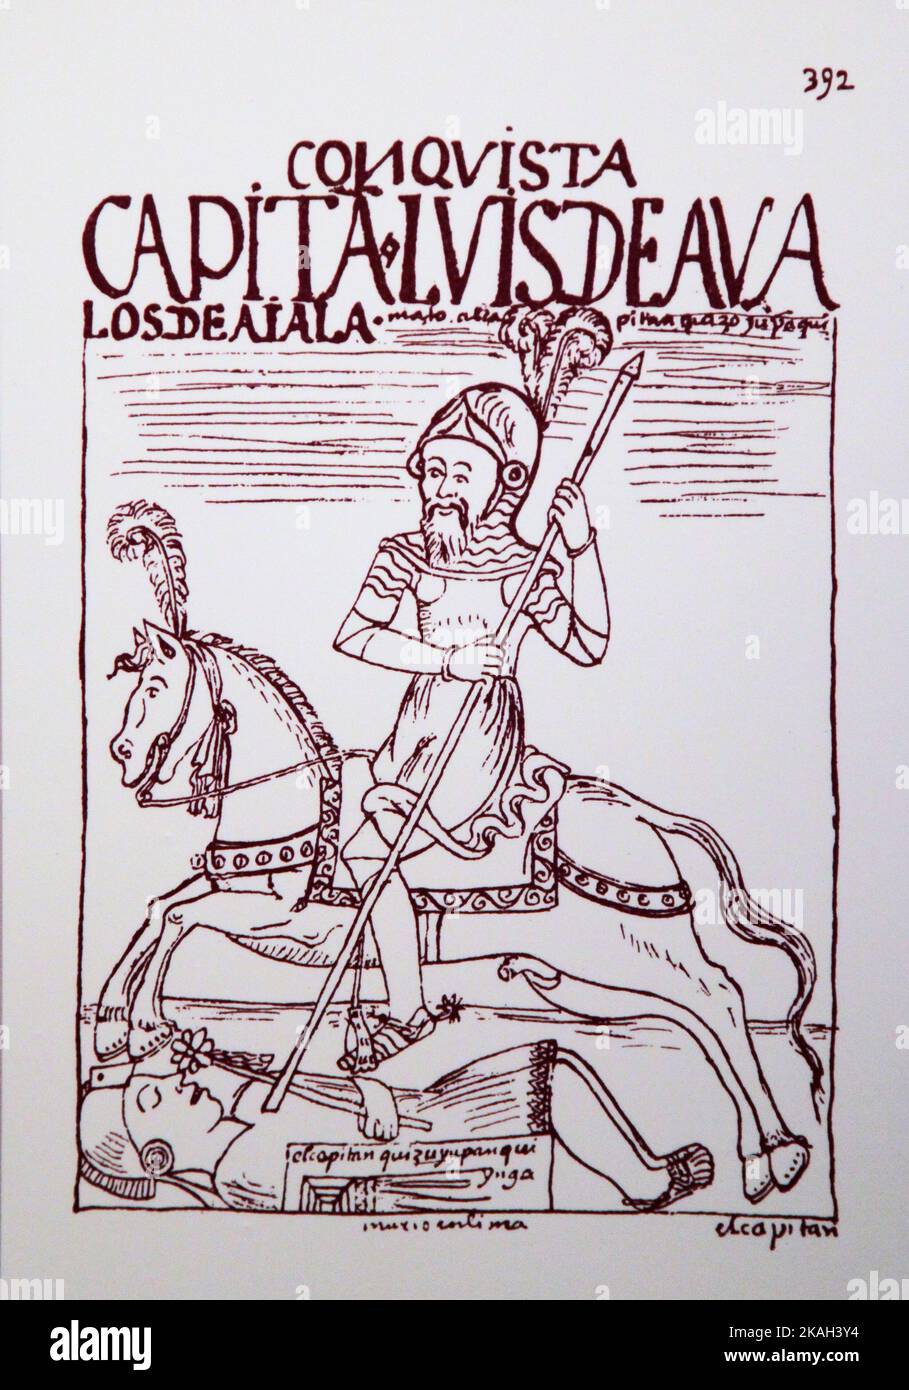 392.Captain Luis de Ávalos de Ayala kills Quizo Yupanqui Inca in the conquest of Lima.by Felipe Guamán Poma de Ayala (1535- 1616).Guamán Poma tells the story how spain built the most extensive colonial empire in the 'New World'' and conquest from an Andean perspective,in particular the ill-treatment of the natives of the Andes by the Spaniards,called the Nueva corónica y buen gobierno. Stock Photo